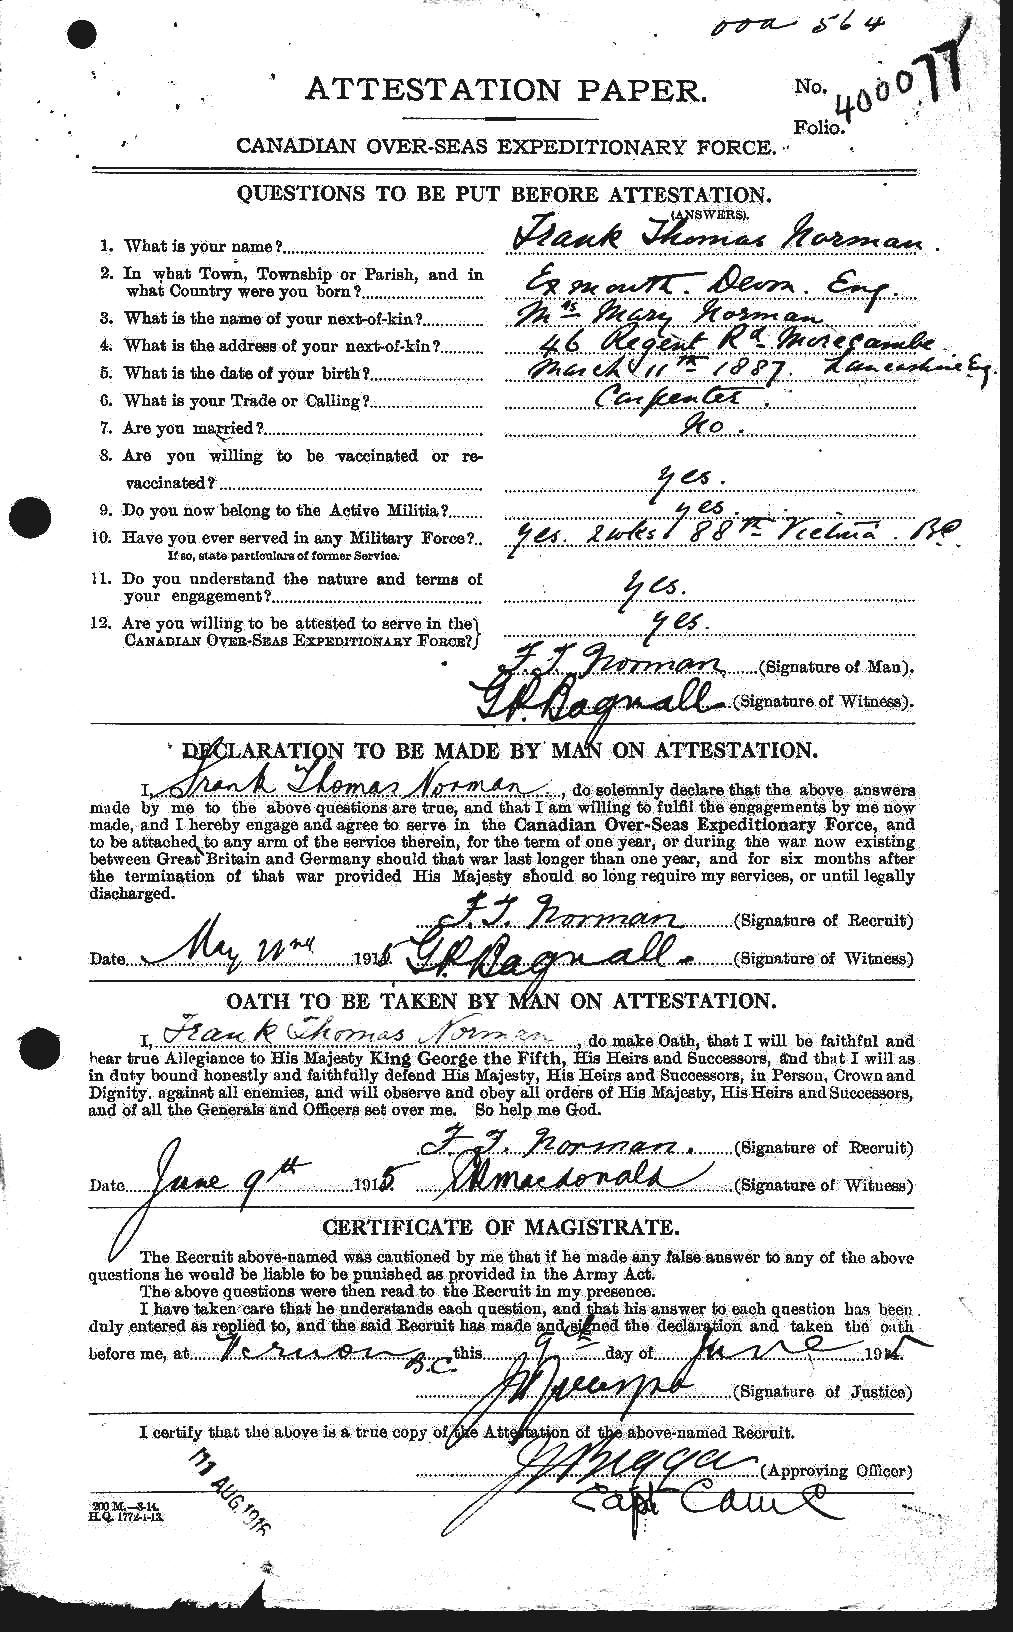 Personnel Records of the First World War - CEF 552092a